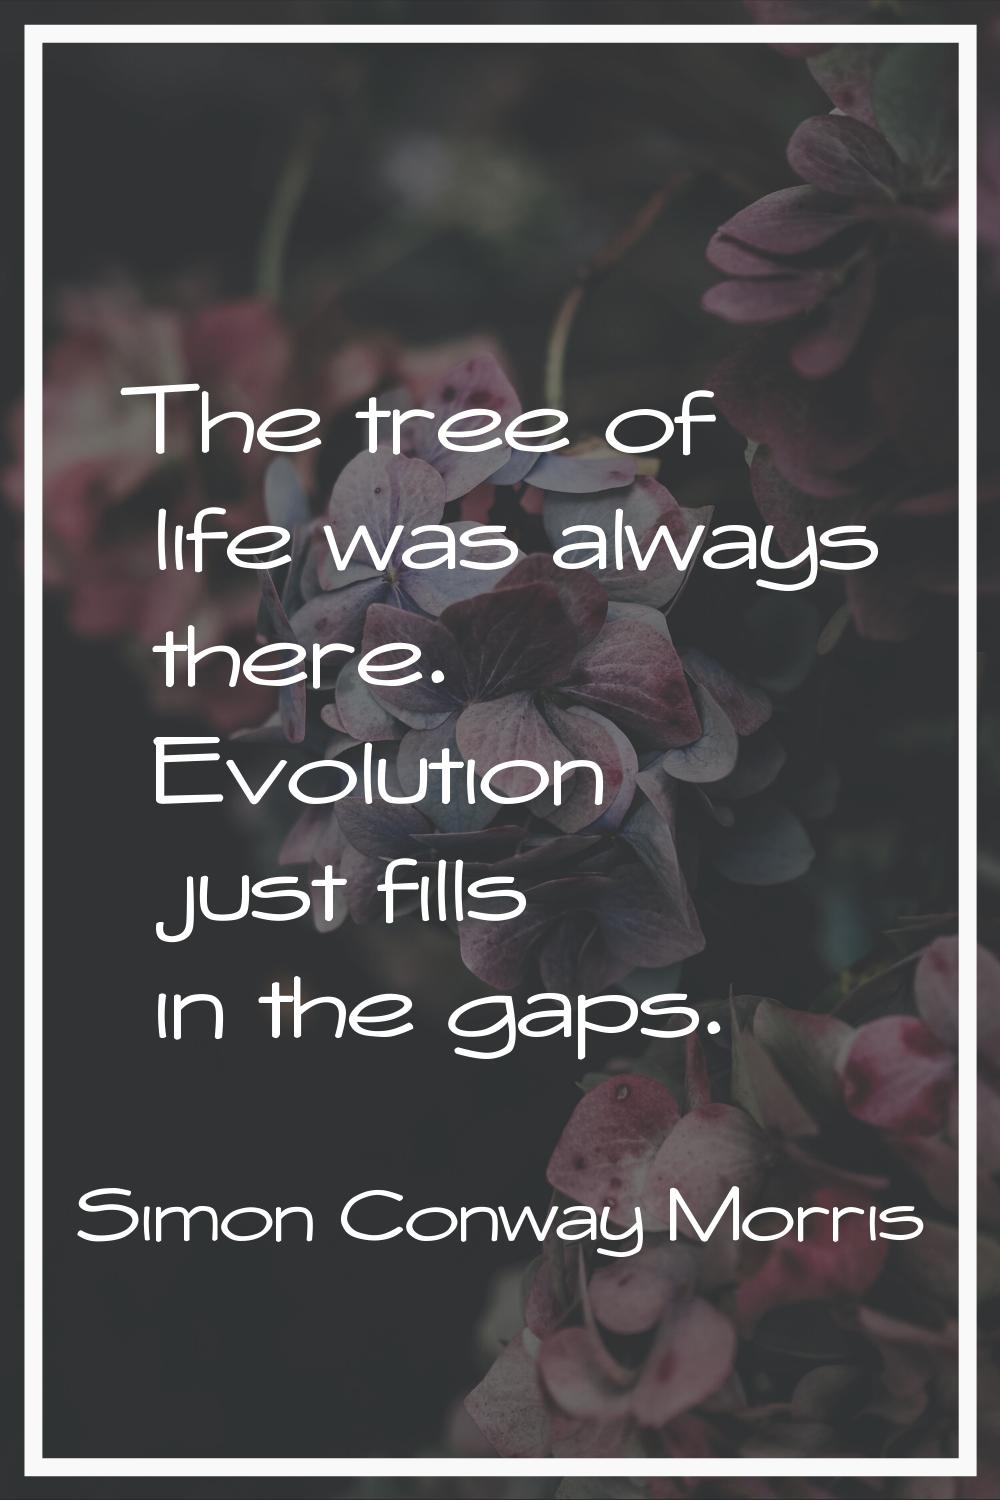 The tree of life was always there. Evolution just fills in the gaps.